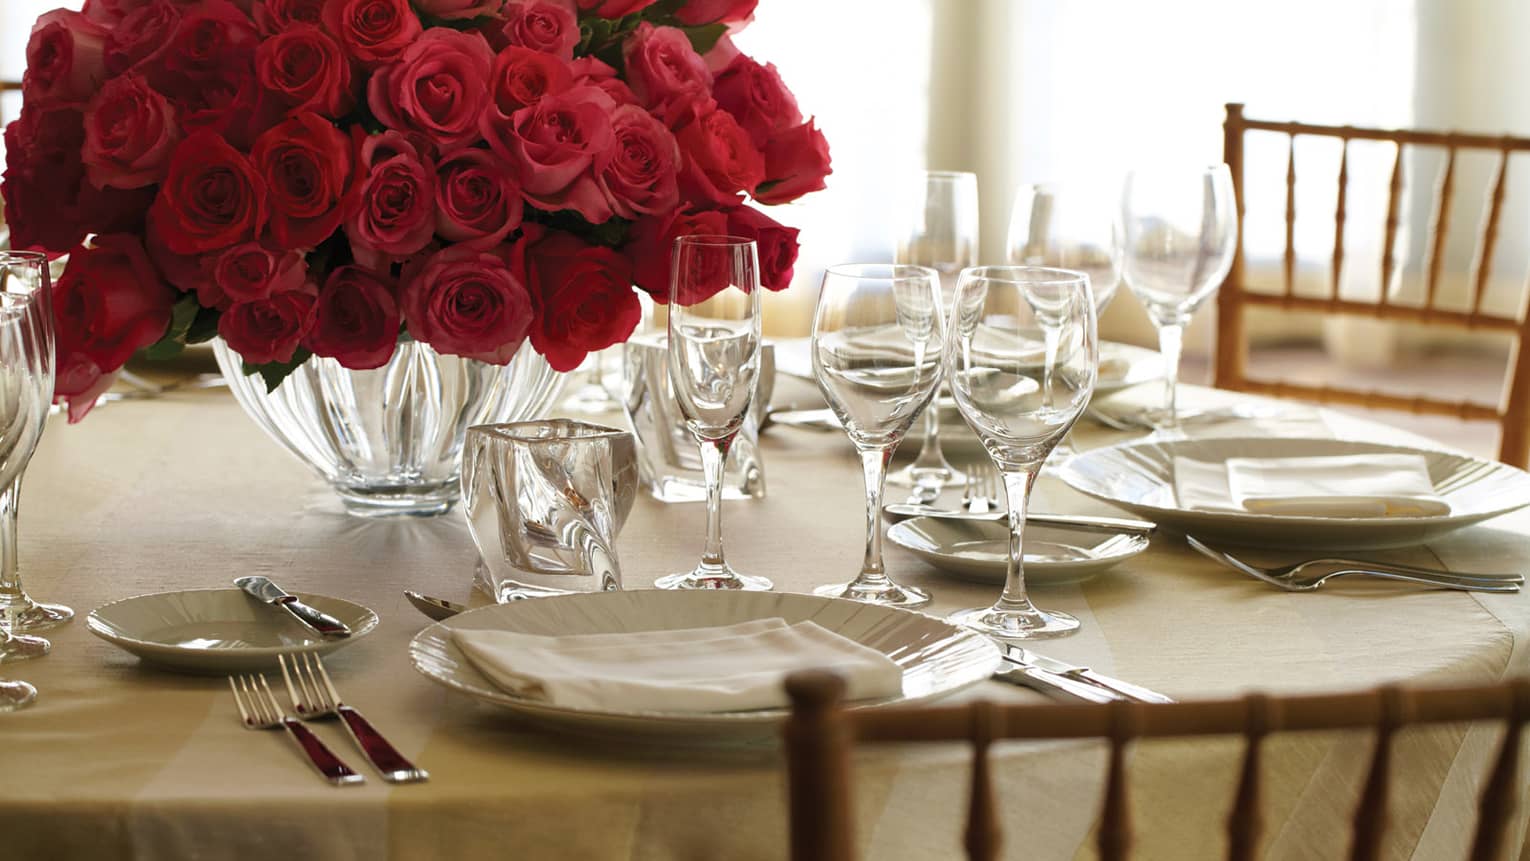 Banquet dining table place setting with plate, crystal glasses and vase with red rose bouquet